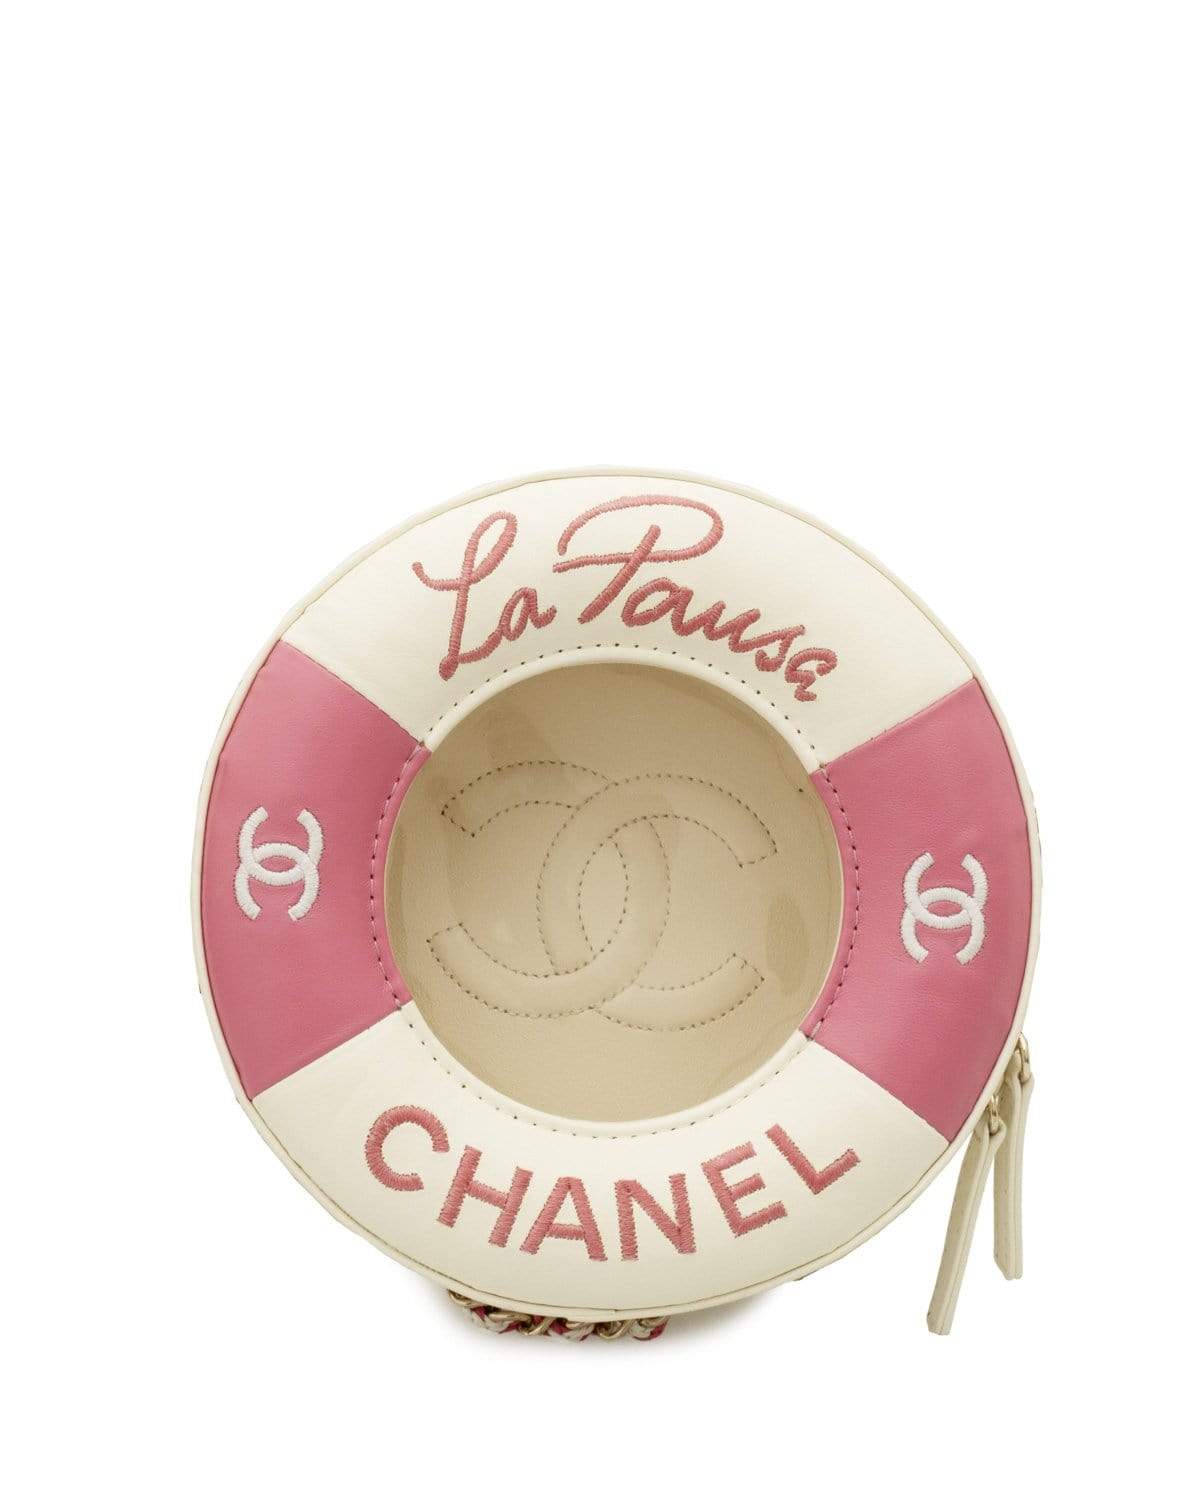 Chanel Lambskin Coco Lifesaver Round Bag Black - One Color